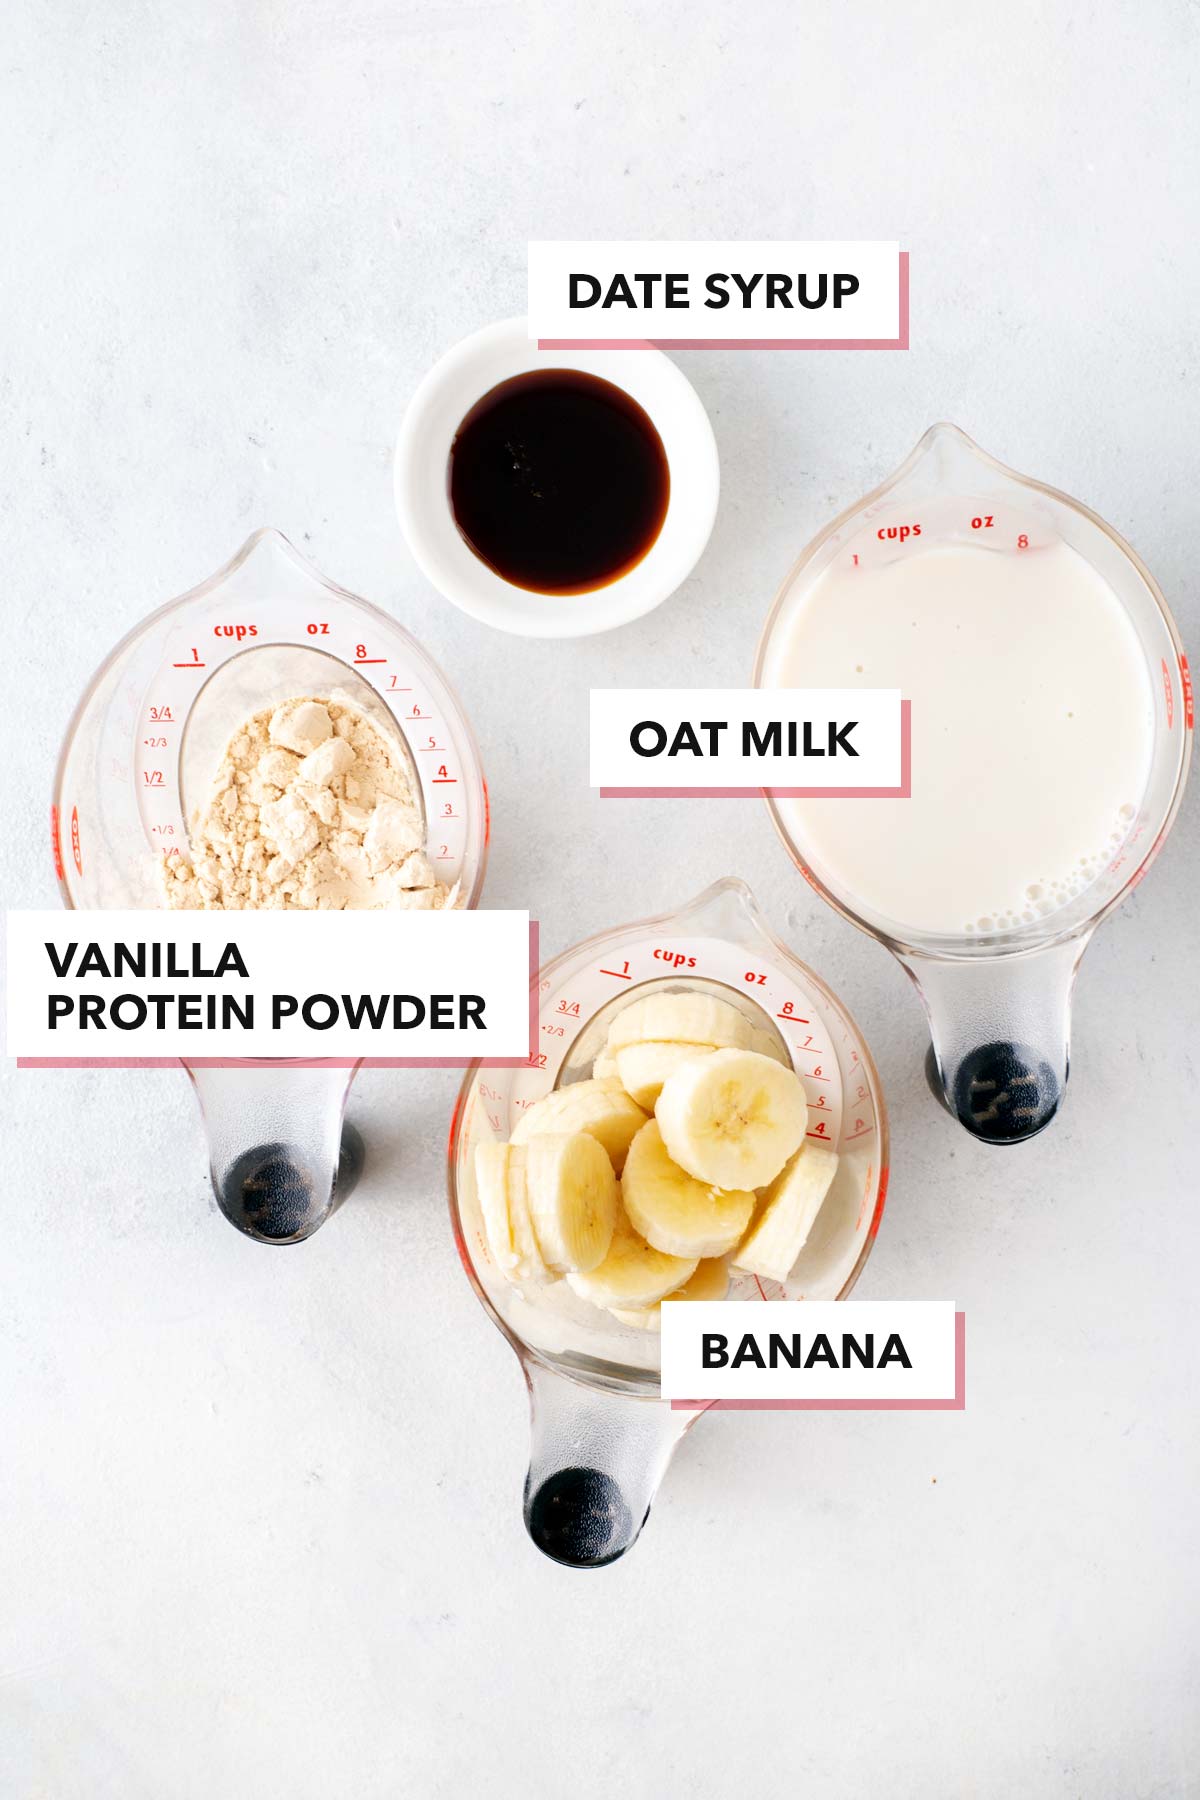 Ingredients for making a banana protein shake.